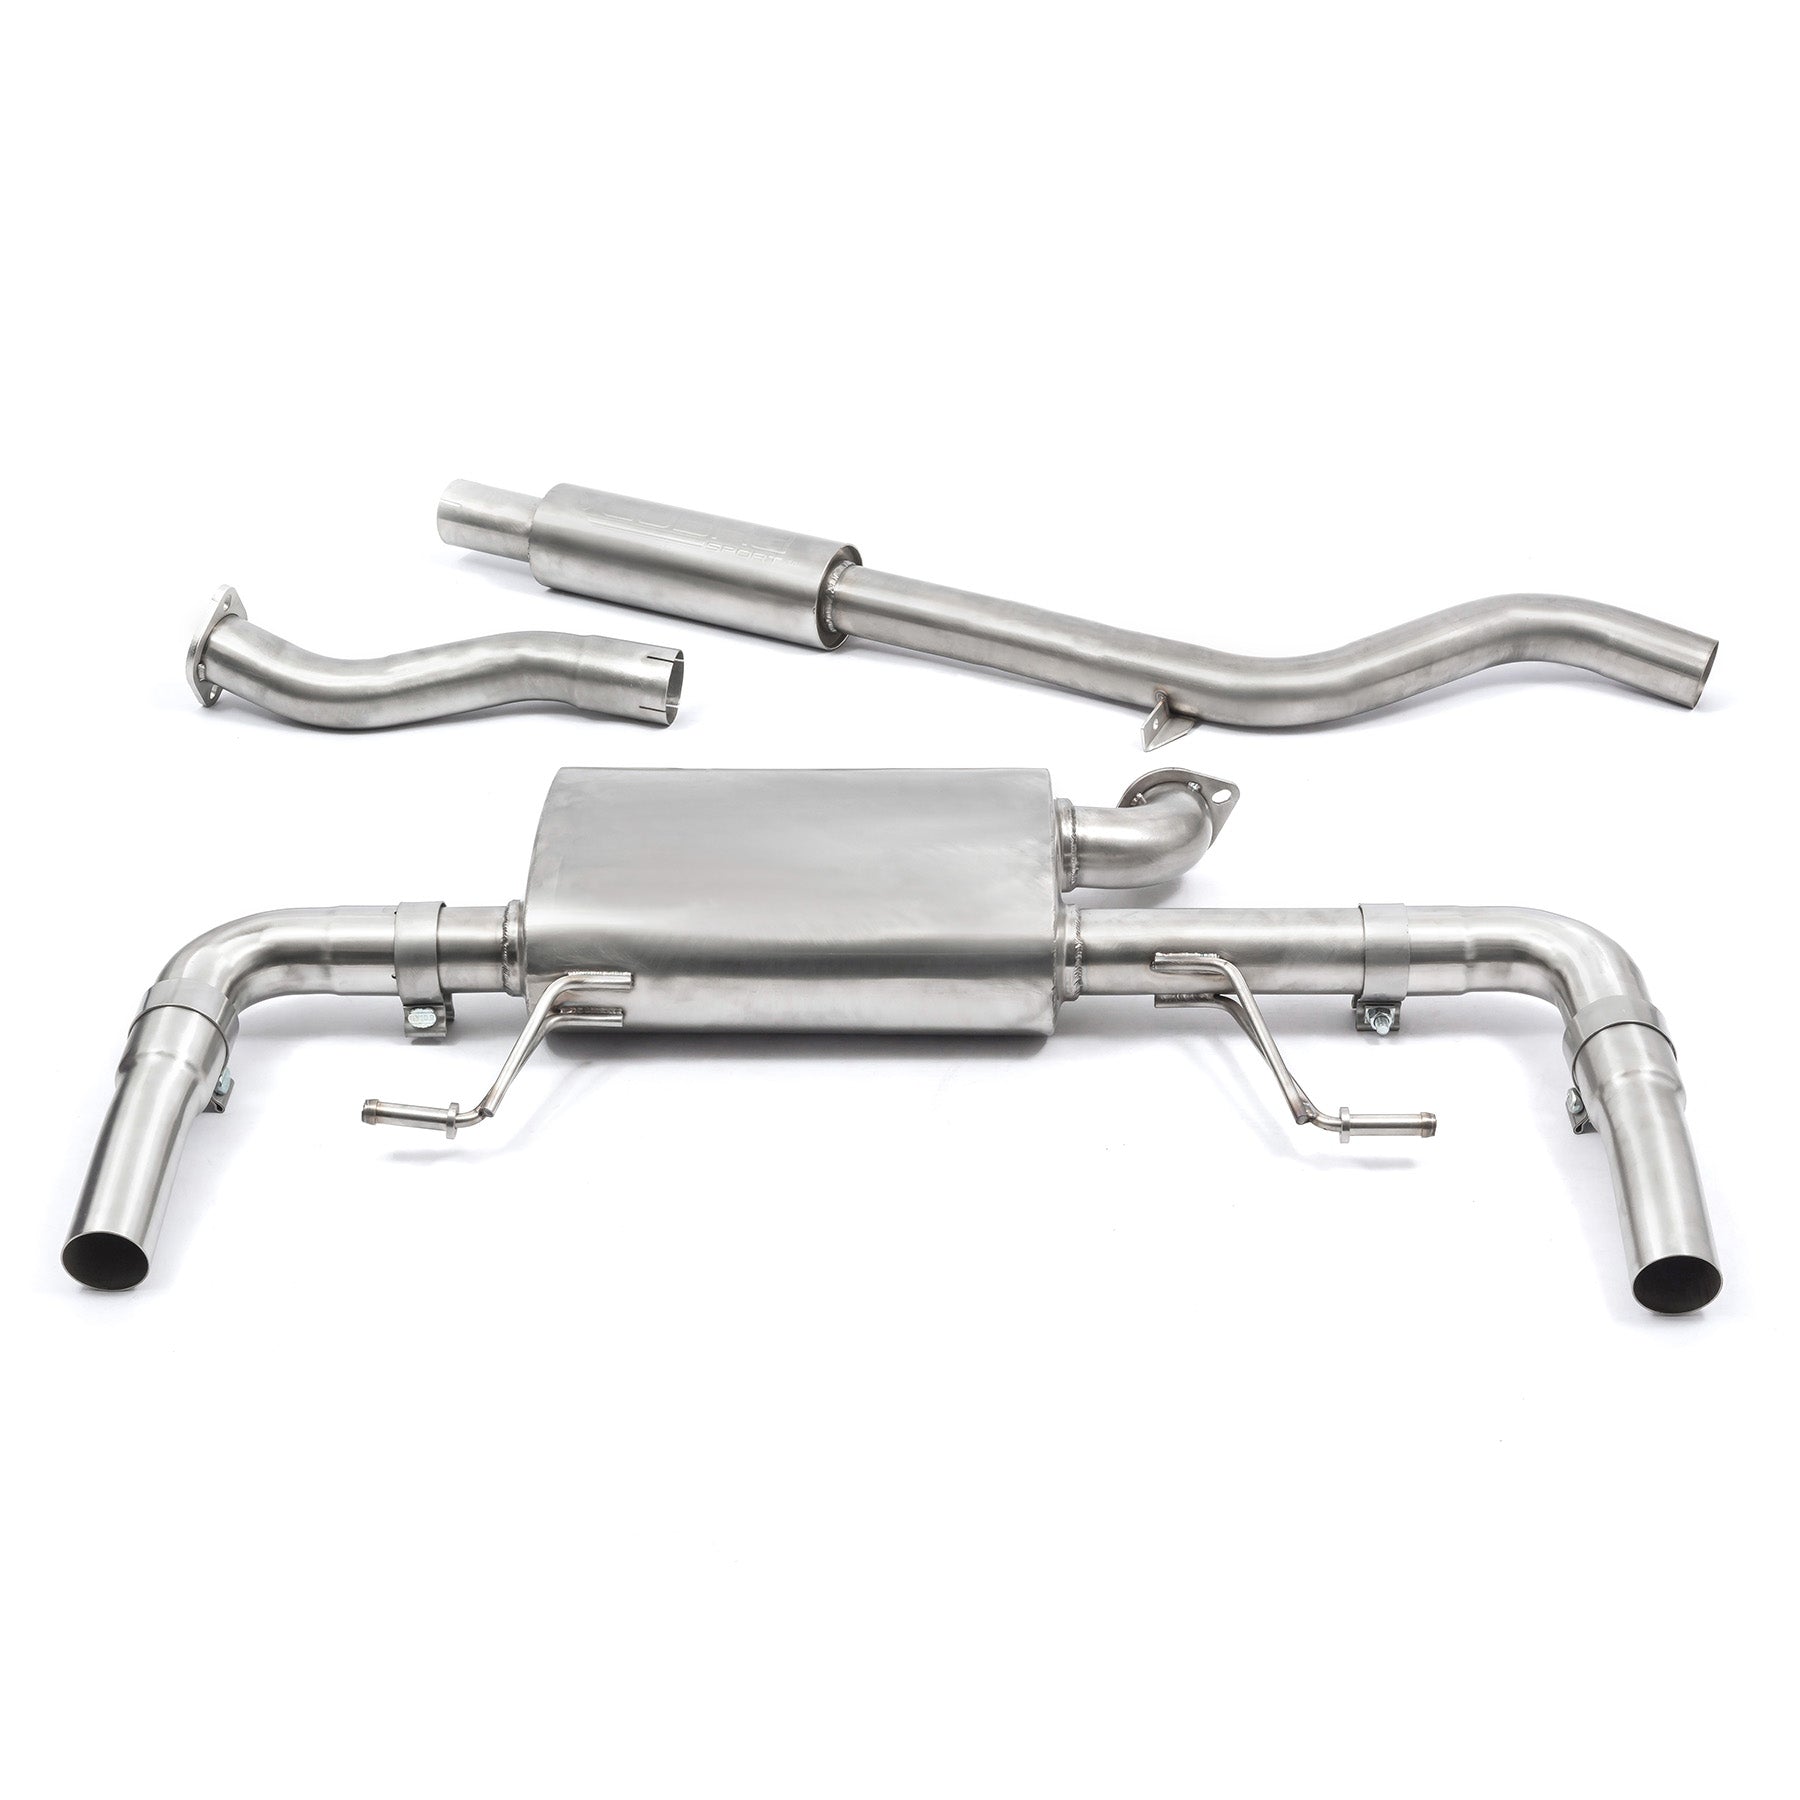 Performance sport exhaust for RENAULT CLIO mk2 RS, RENAULT CLIO II